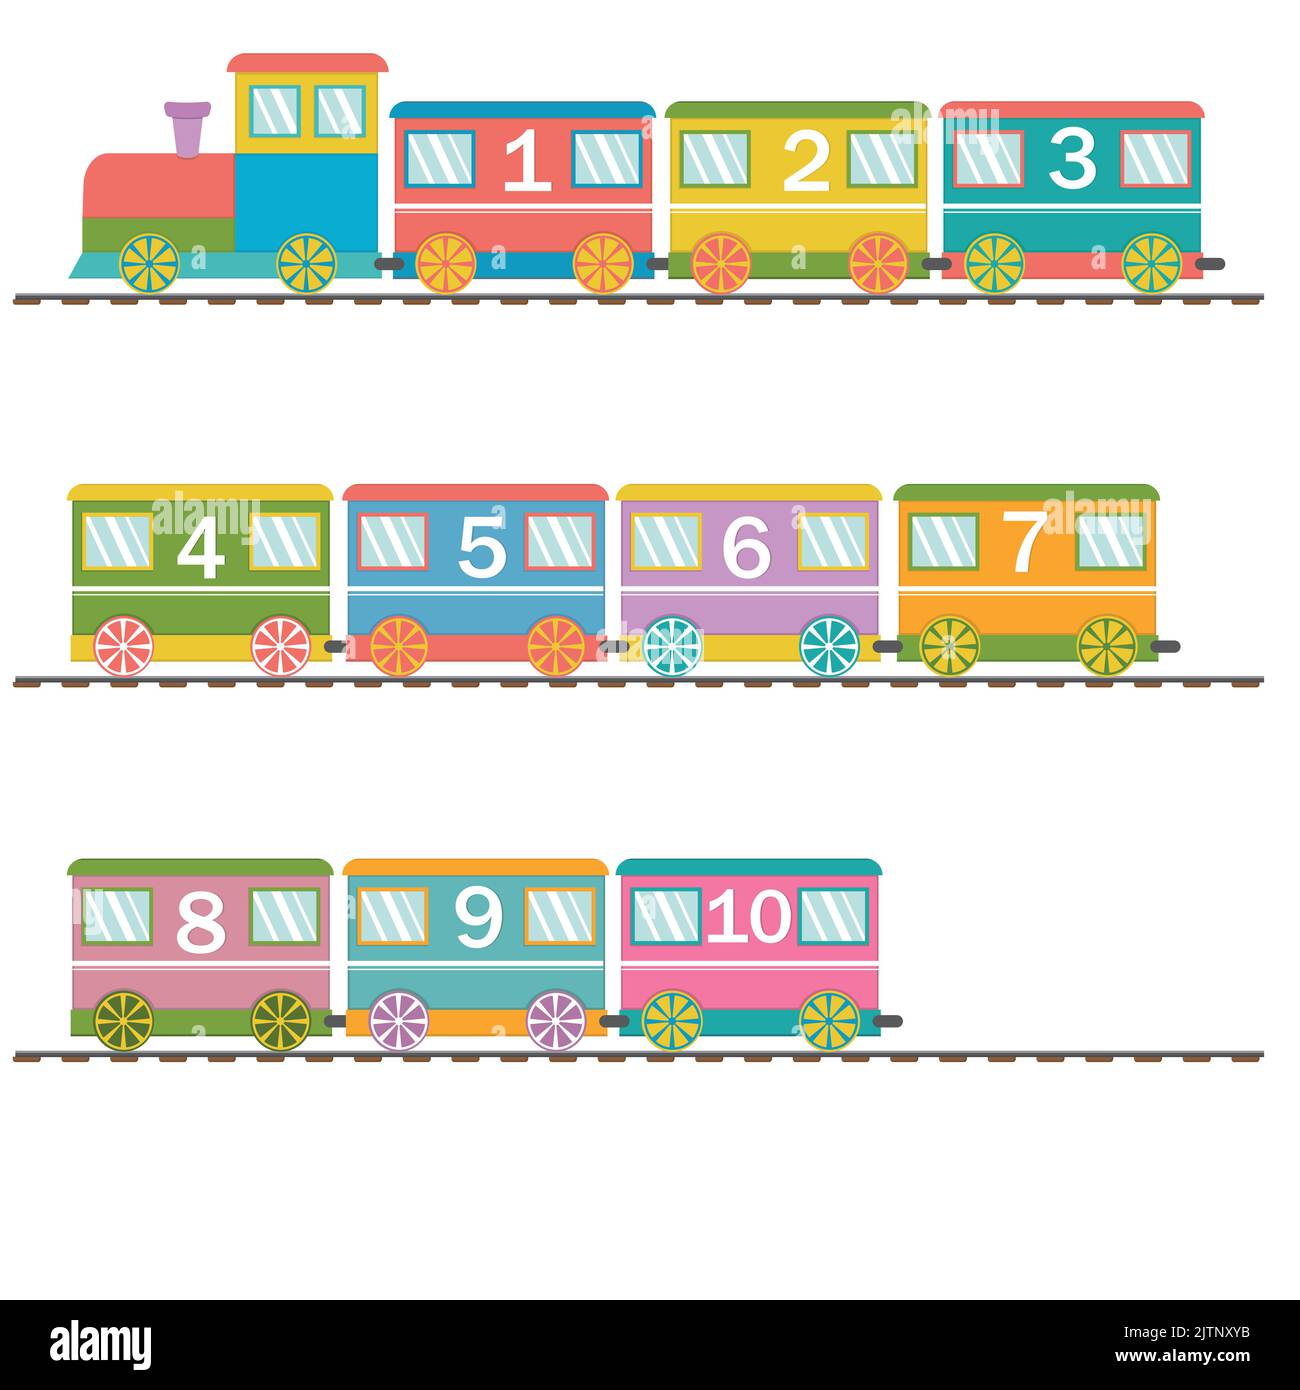 Wooden train with carriages and numbers, back to school, color vector illustration in flat style. Stock Vector